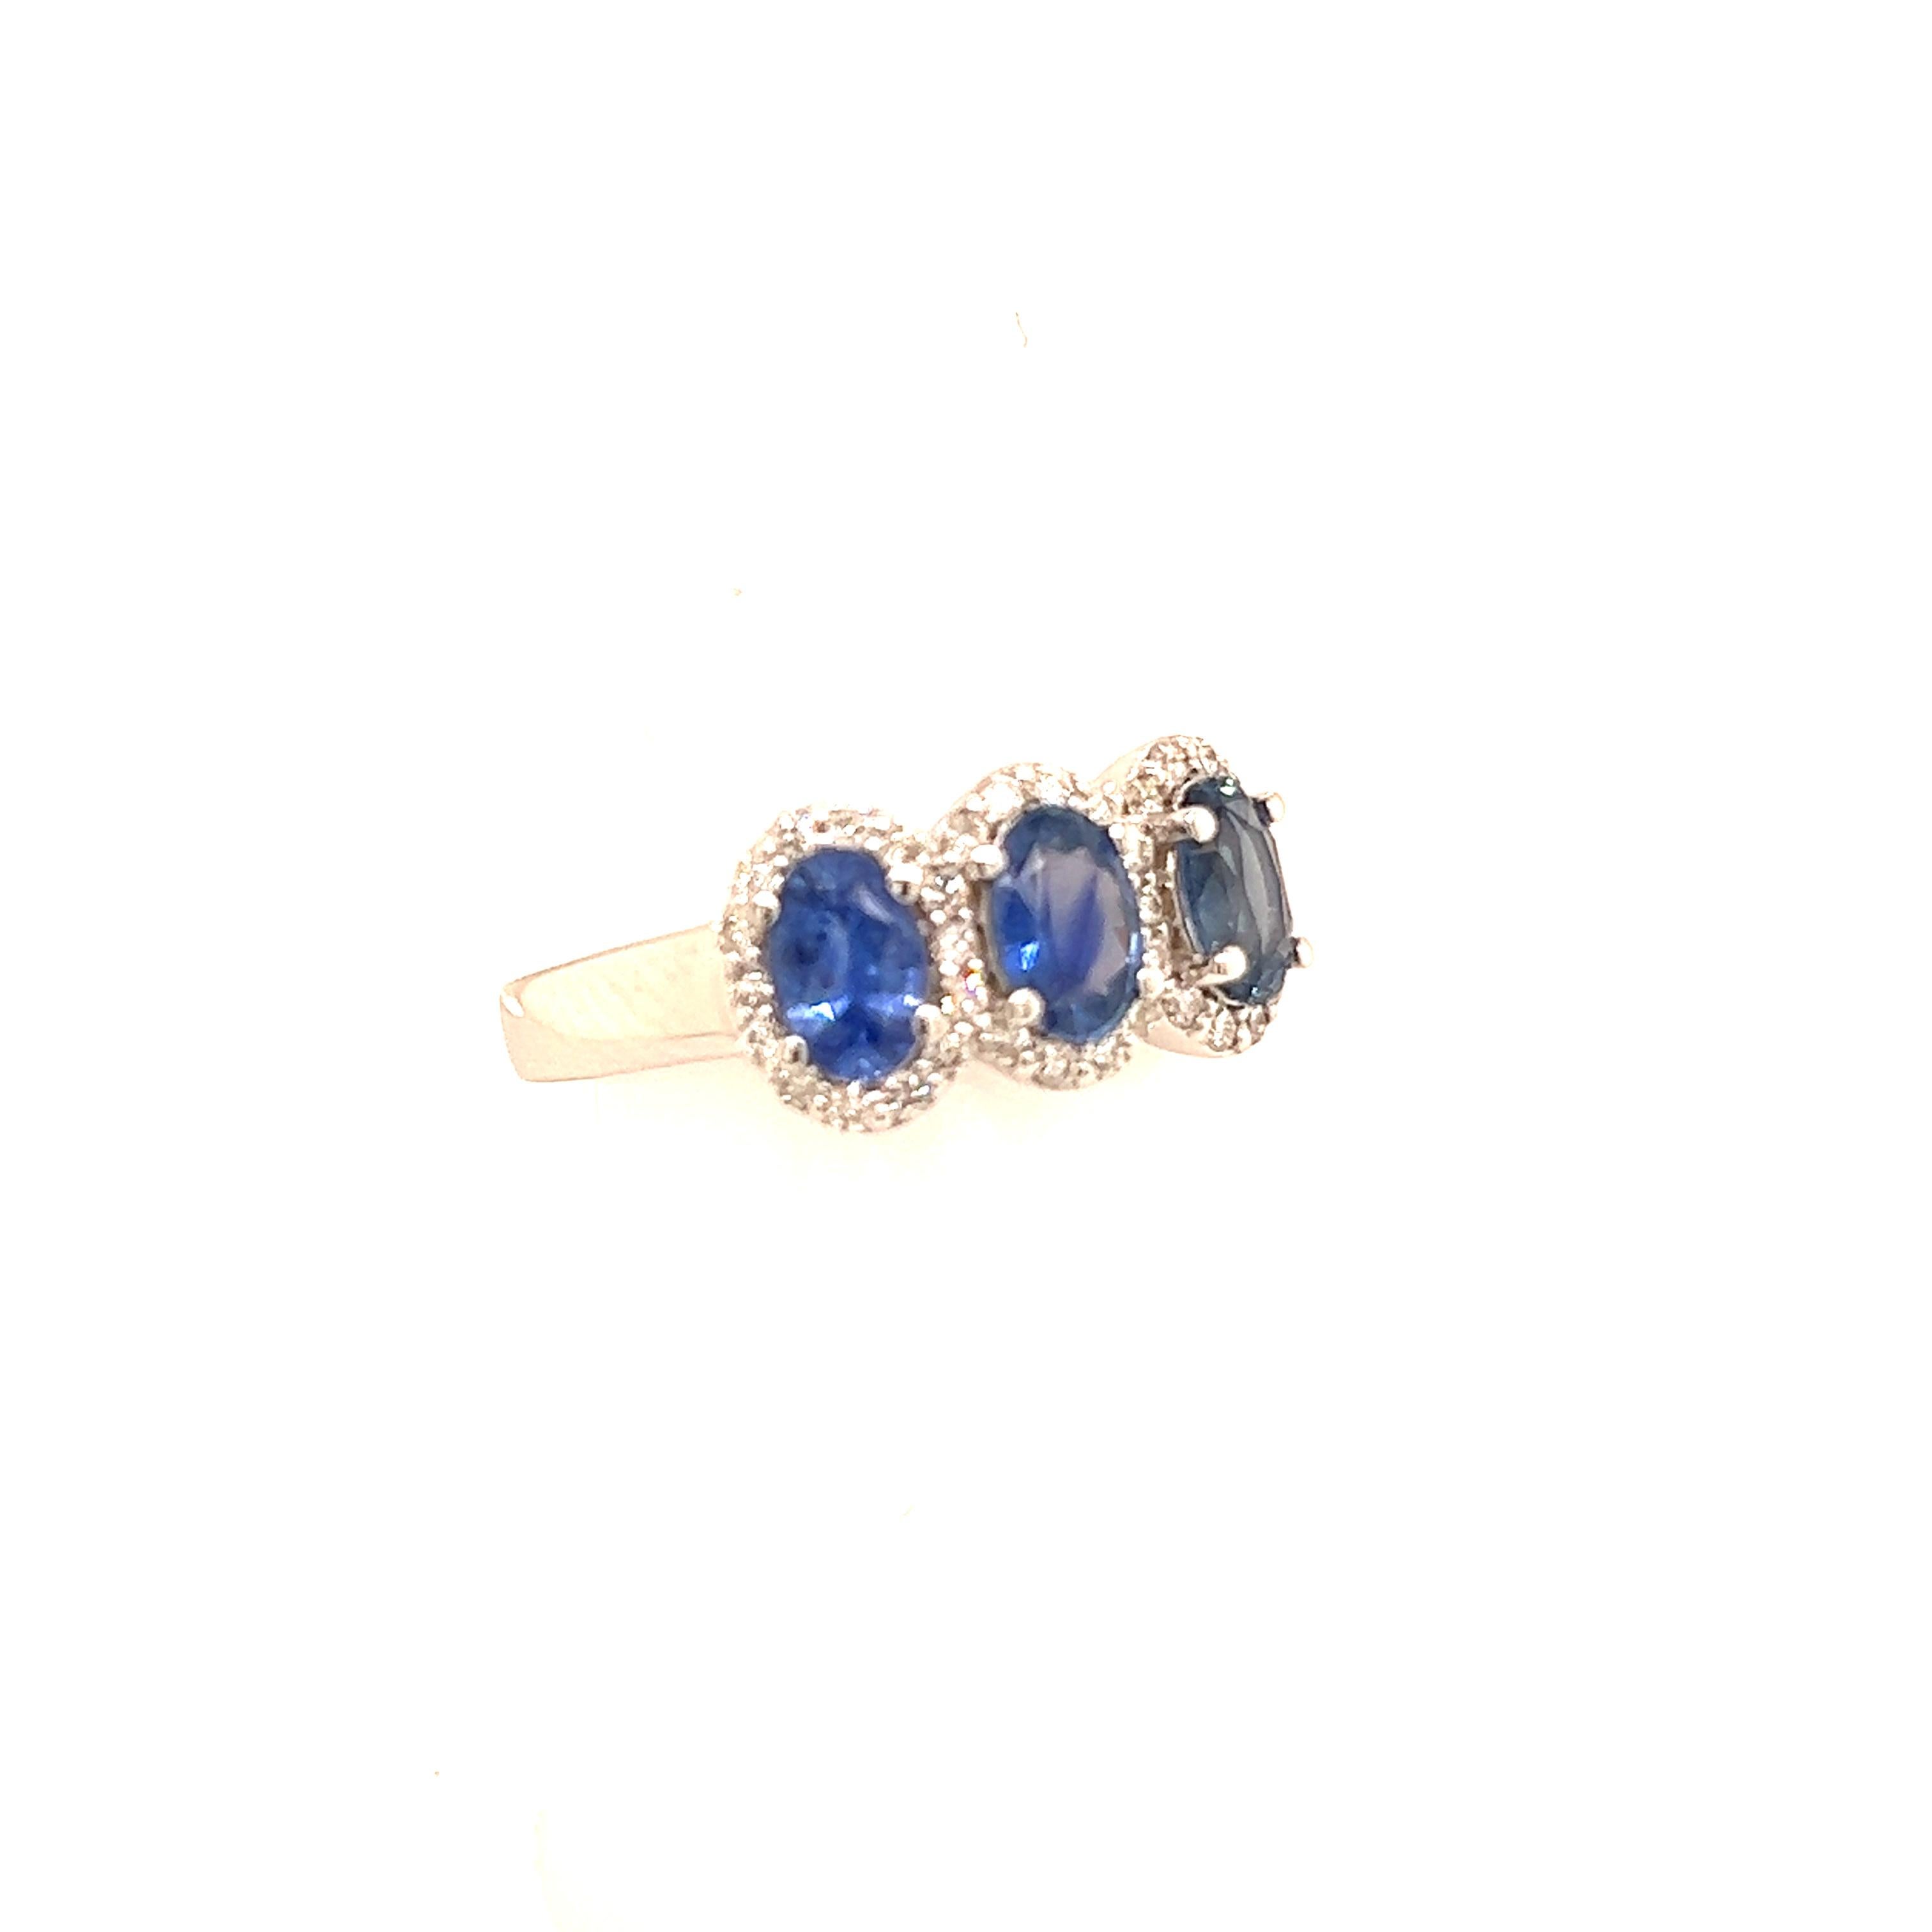 Natural Sapphire Diamond Ring 7 14k W Gold 1.67 TCW Certified For Sale 4